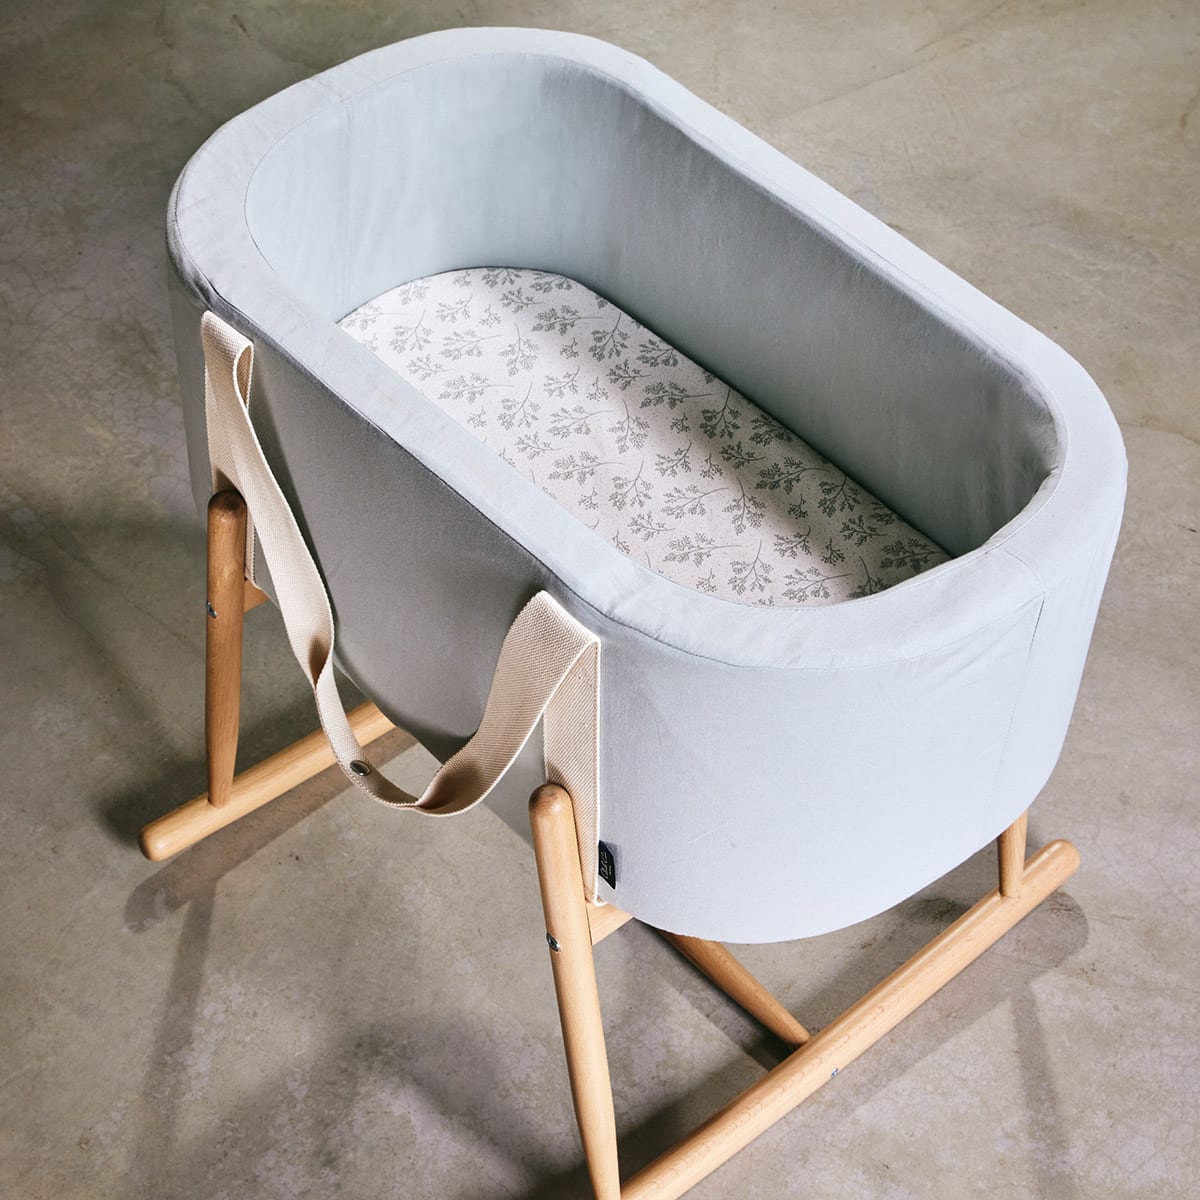 Fitted Sheet for the KUKO Moses Basket and KUMI Bassinet by Charlie Crane - Maude Kids Decor